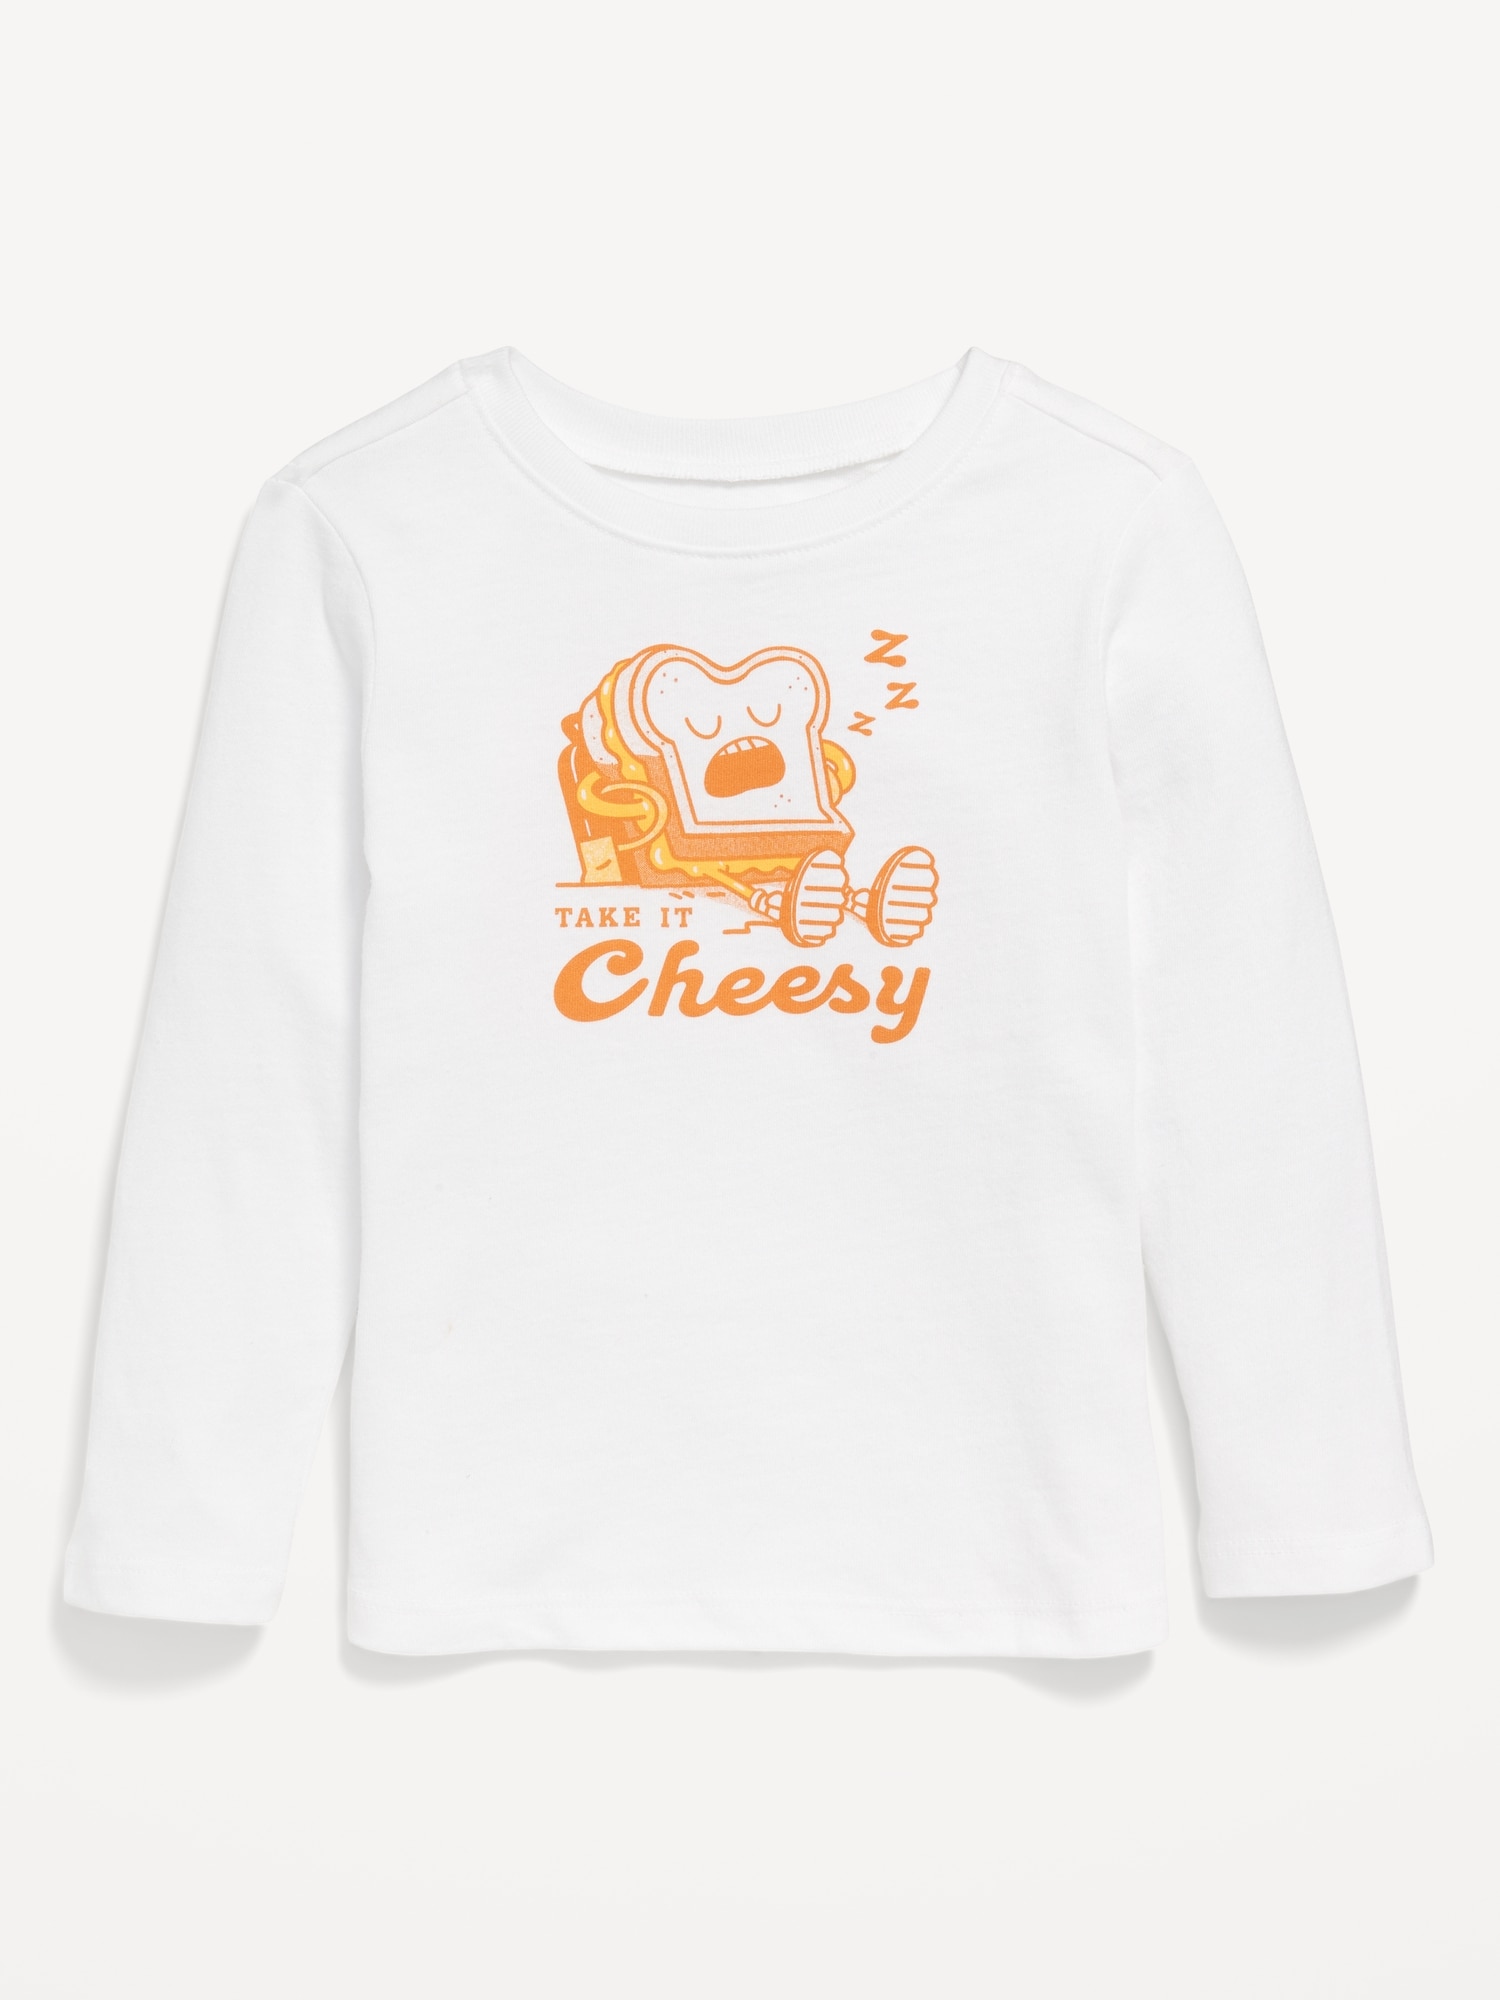 Long-Sleeve Graphic T-Shirt for Toddler Boys